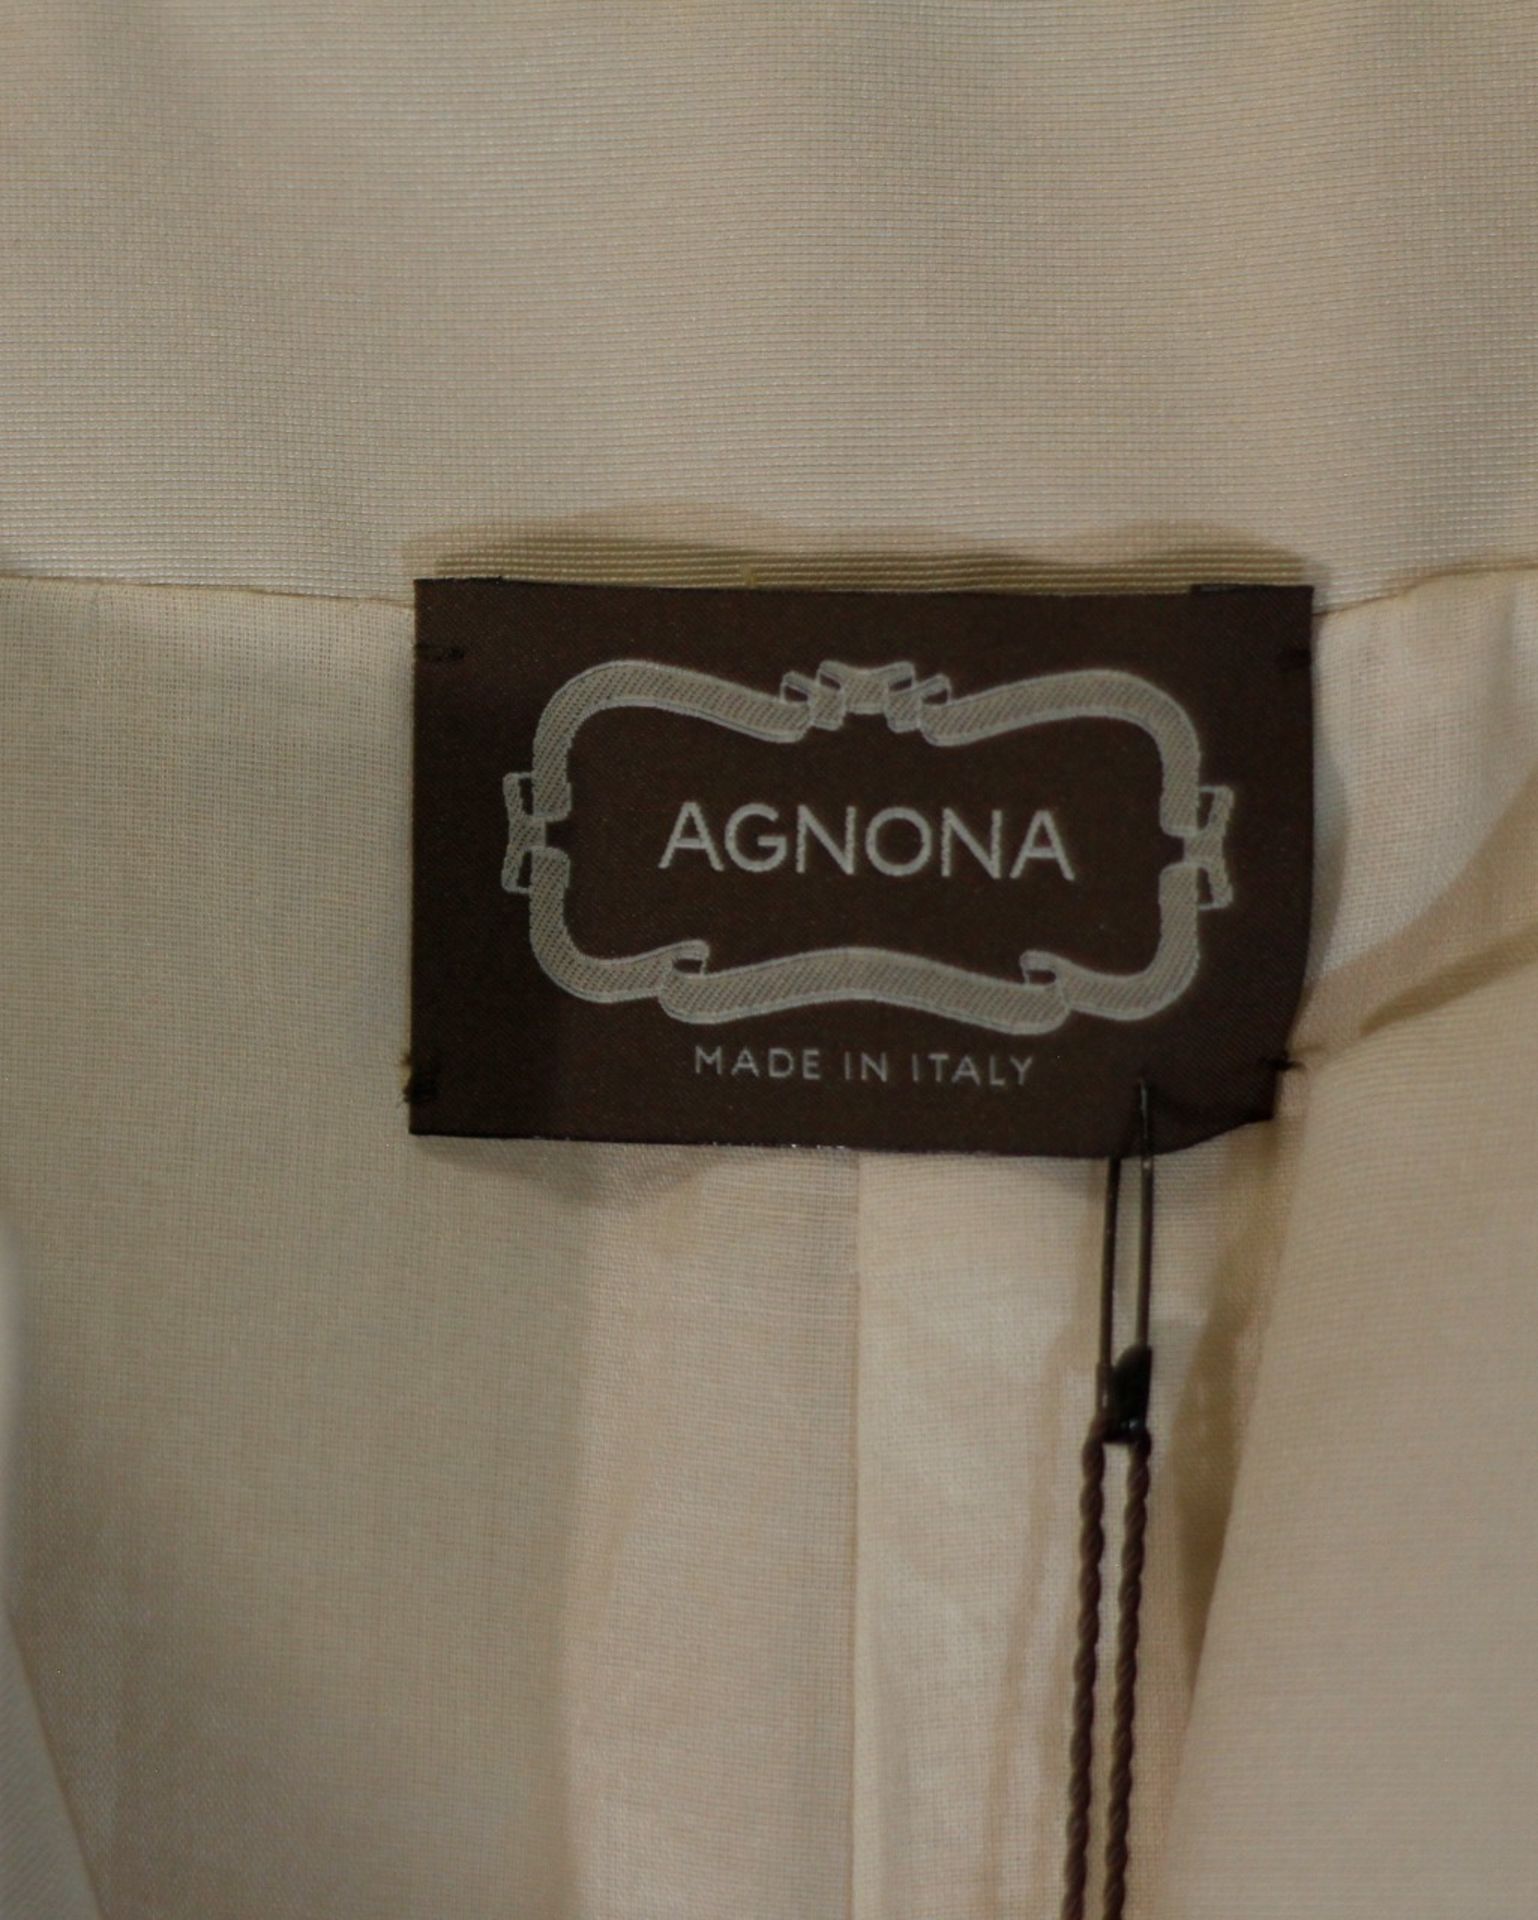 1 x Agnona Champagne Top - Size: 18 - Material: 69% Cotton, 31% Silk. Lining 100% Cotton - From a - Image 3 of 10